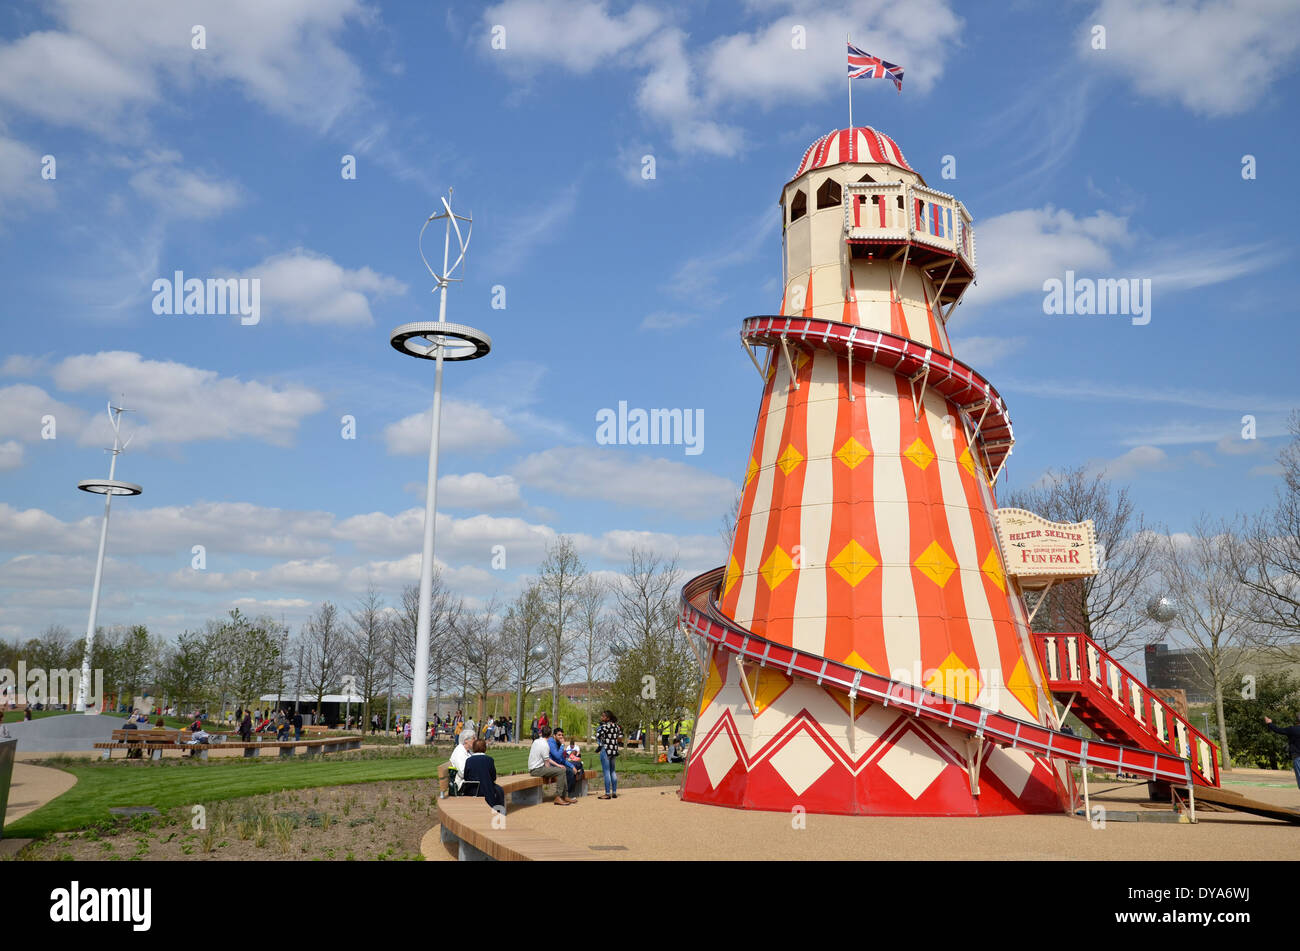 A helter skelter at Queen Elizabeth Olympic Park in Stratford, London Stock Photo